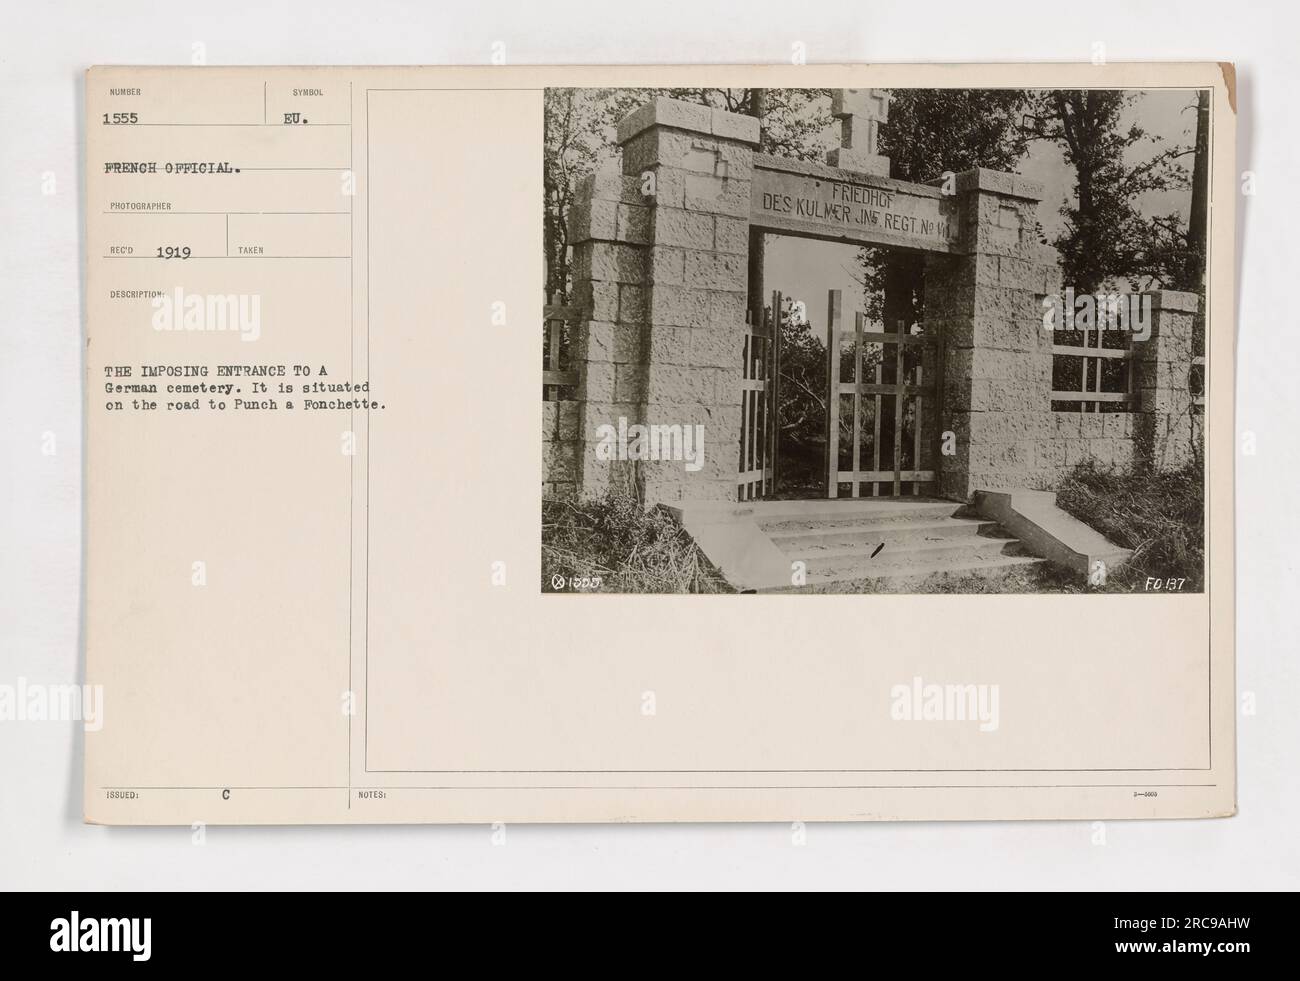 The entrance to a German cemetery of the 141st Regiment Infantry, located on the road to Punch a Fonchette. The entrance is imposing and features symbolic elements. The photograph was taken in 1919 by a French official photographer named Red. The image is part of the collection 'Photographs of American Military Activities during World War One.' Stock Photo